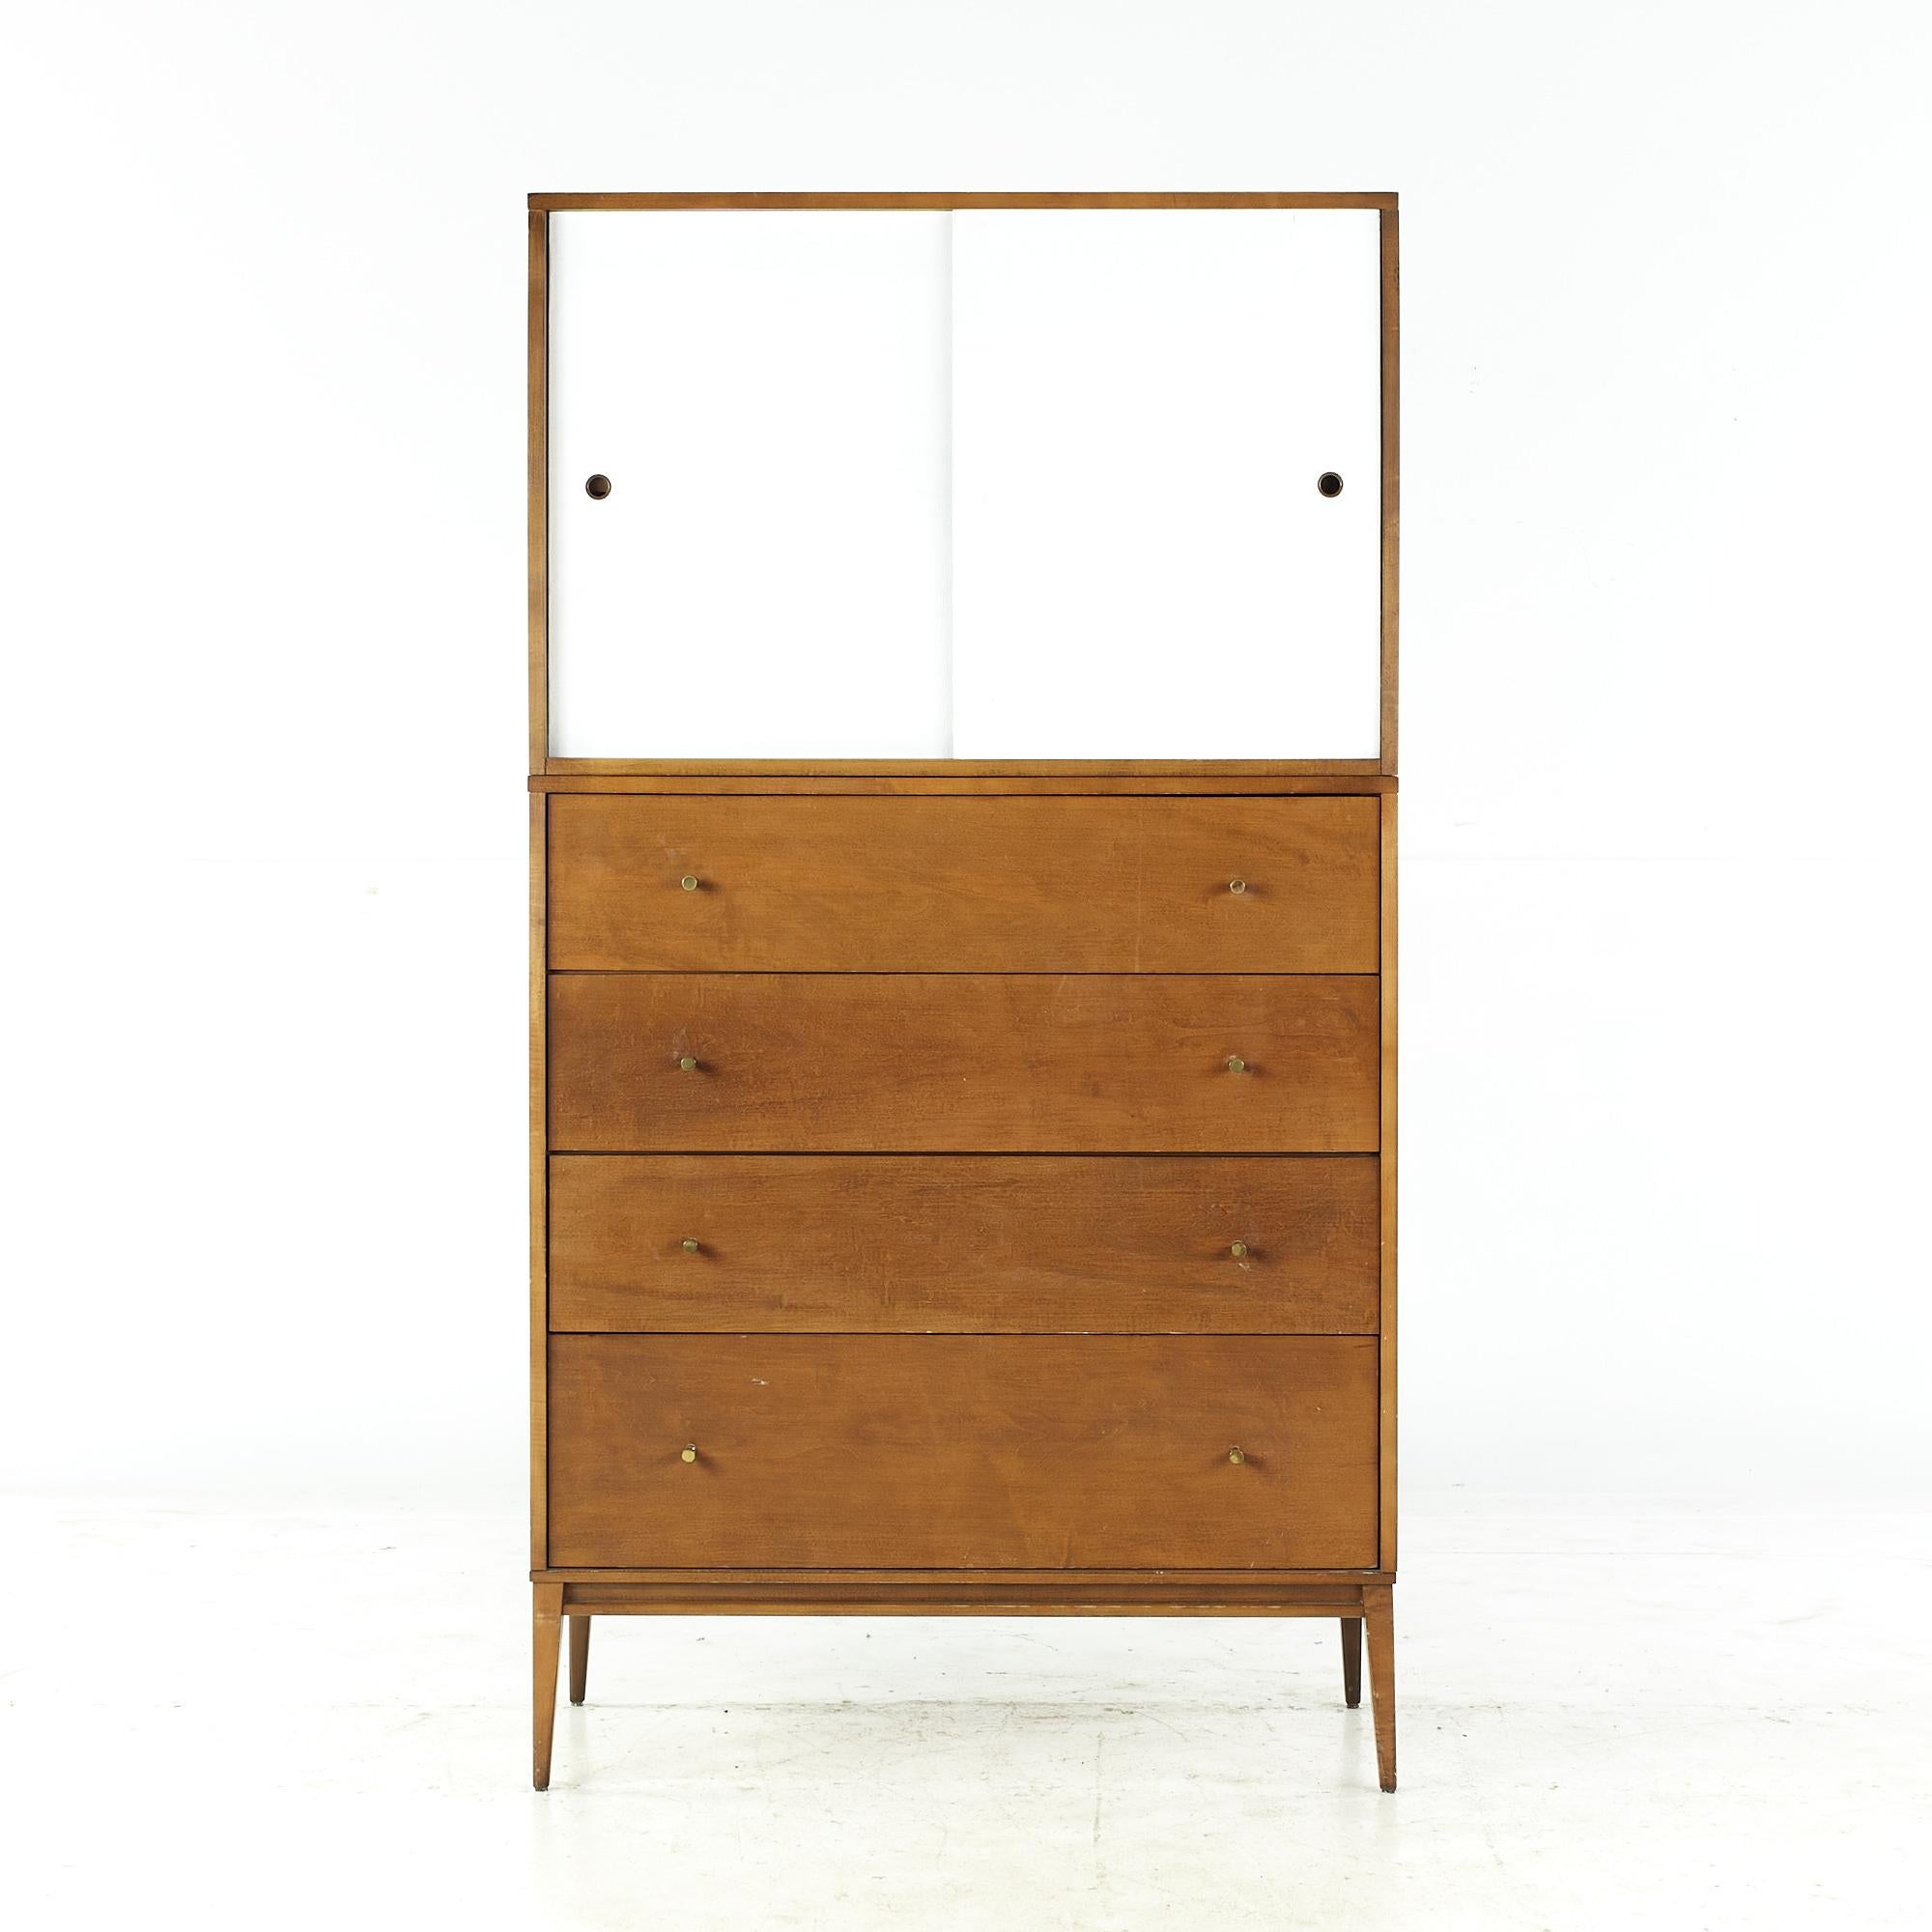 Paul McCobb planner group midcentury 4-drawer dresser with sliding door cabinet.

The bottom measures: 36 wide x 18 deep x 42.25 inches high.
The top measures: 36 wide x 18 deep x 24.25 inches high.
The combined height of the buffet and hutch is